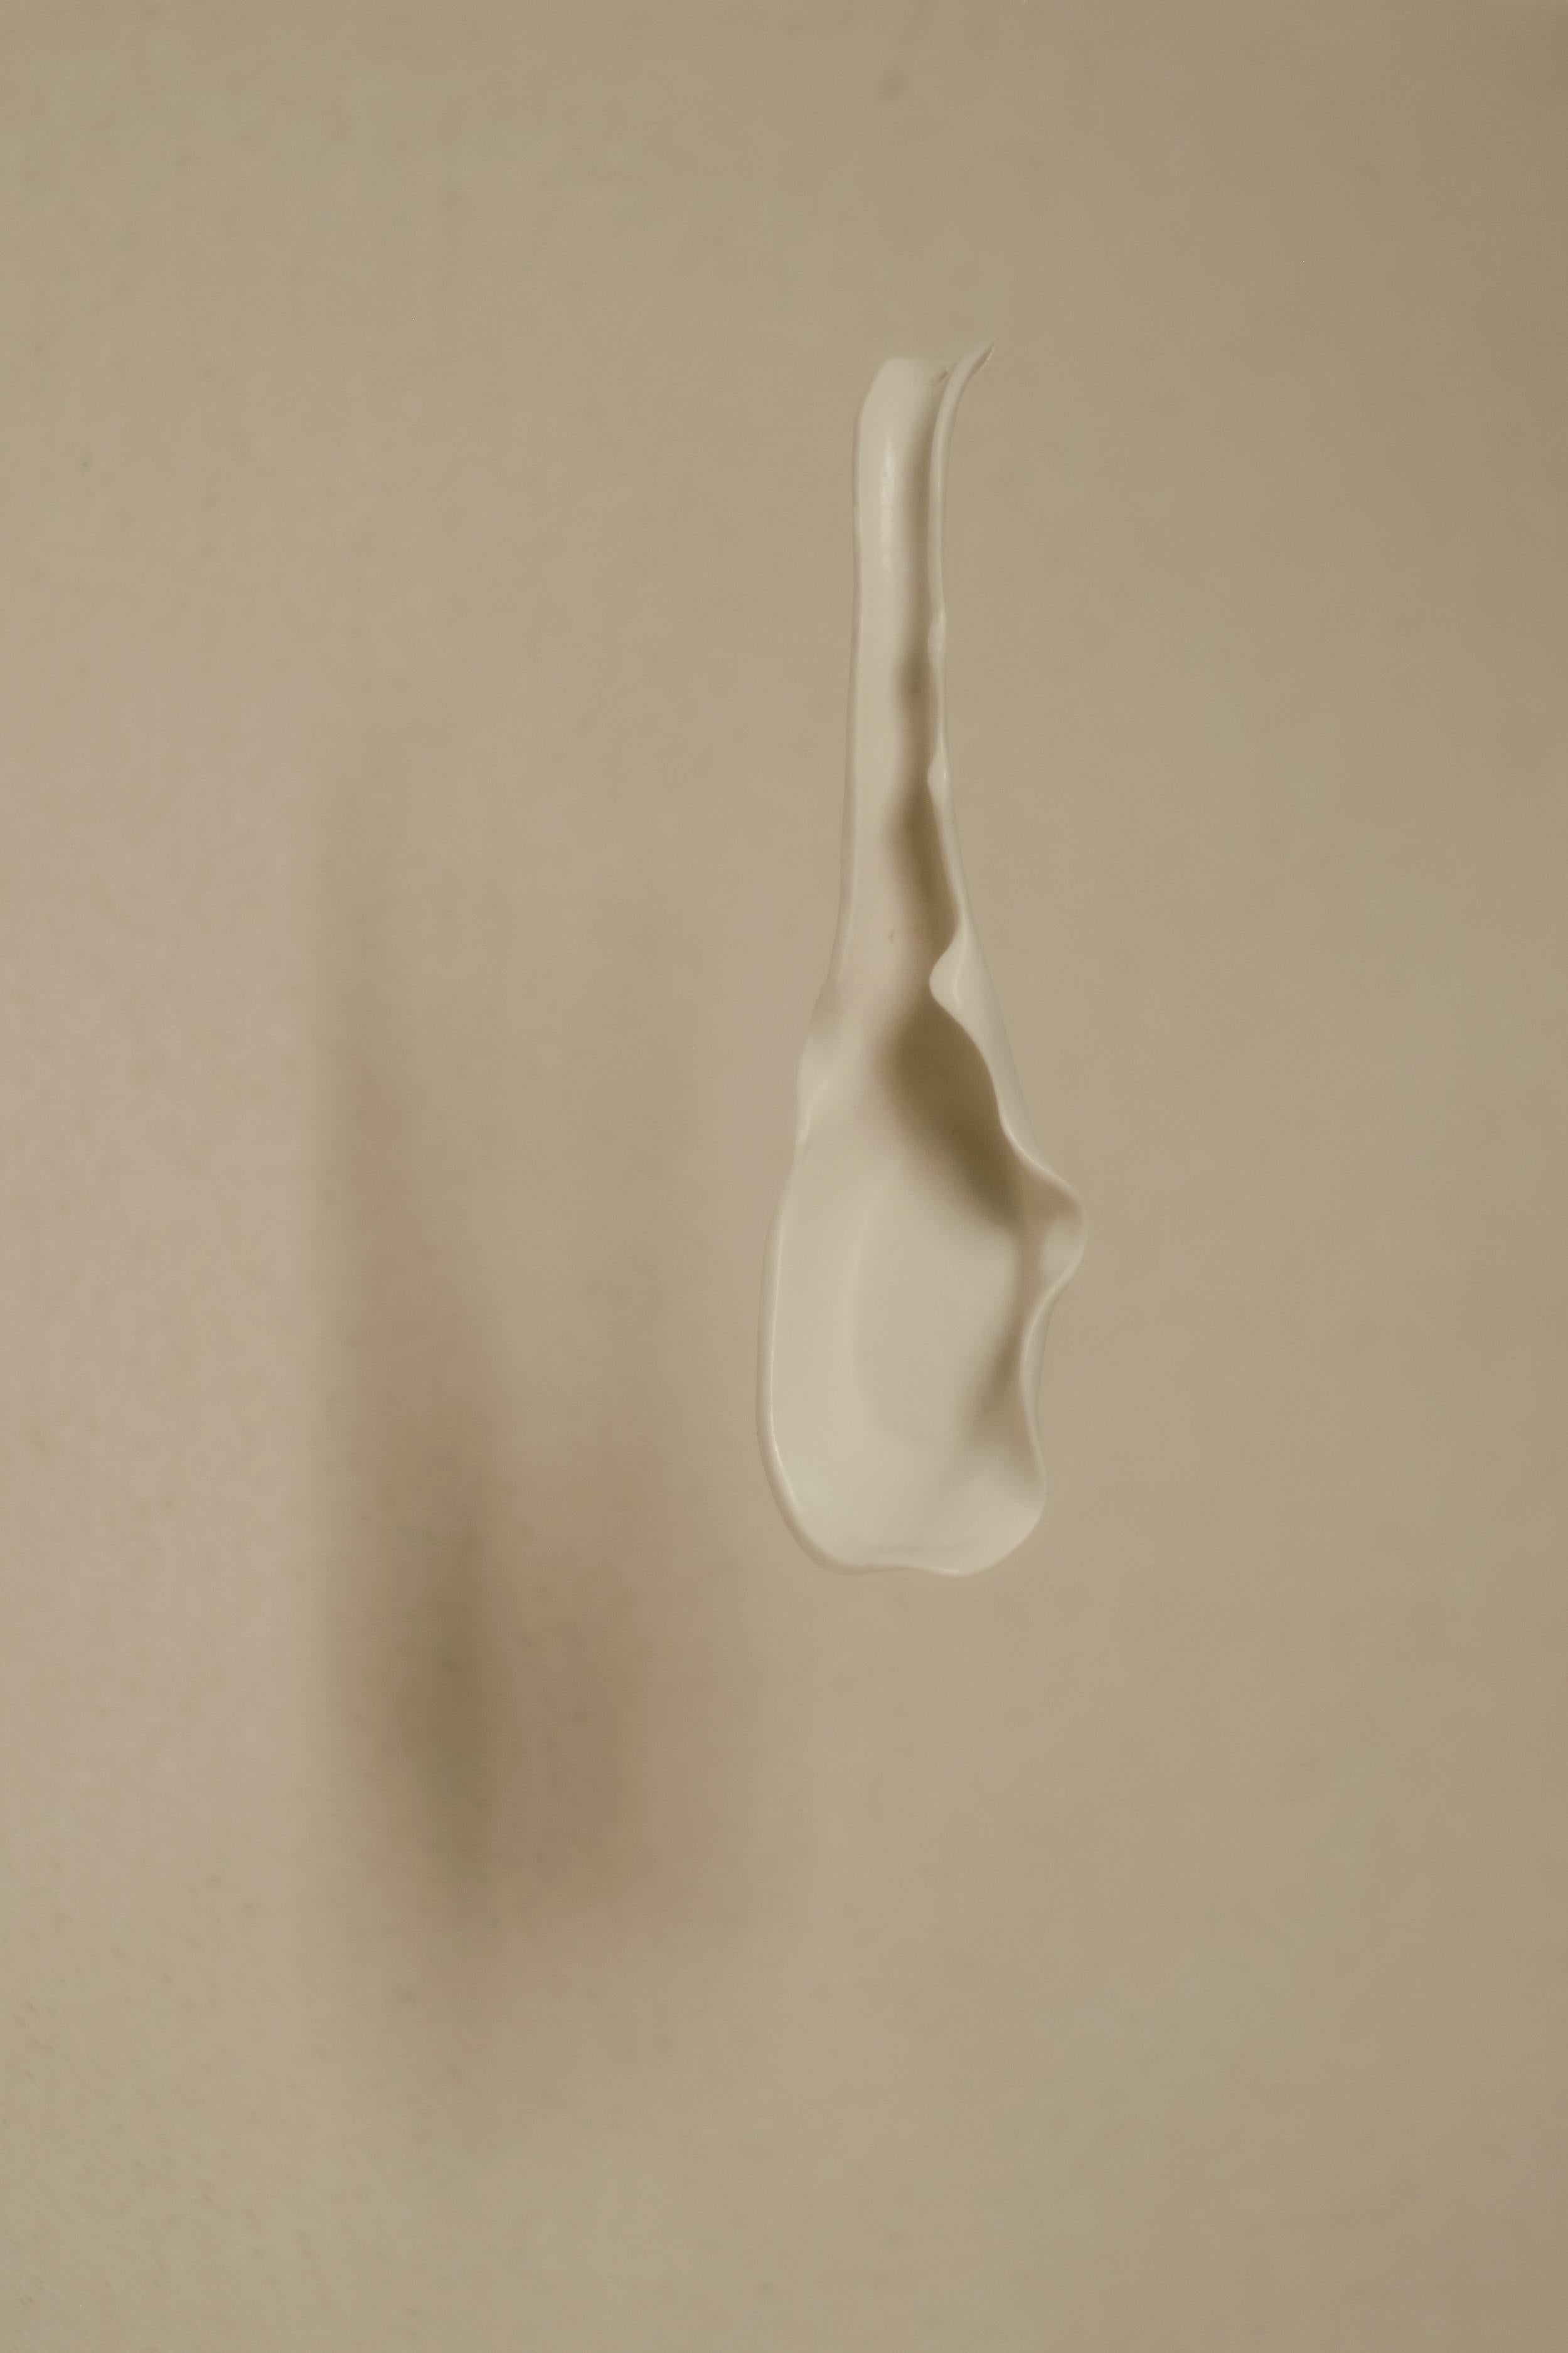 Sculptural Spoon by Liyang Zhang
One Of A Kind.
Dimensions: D 15 x W 4,5 x H 2,5 cm.
Materials: Porcelain. 

Hand moulded and refined with a knife. Food and dishwasher safe. All dimensions are approximate. Please contact us.

Liyang Zhang is a